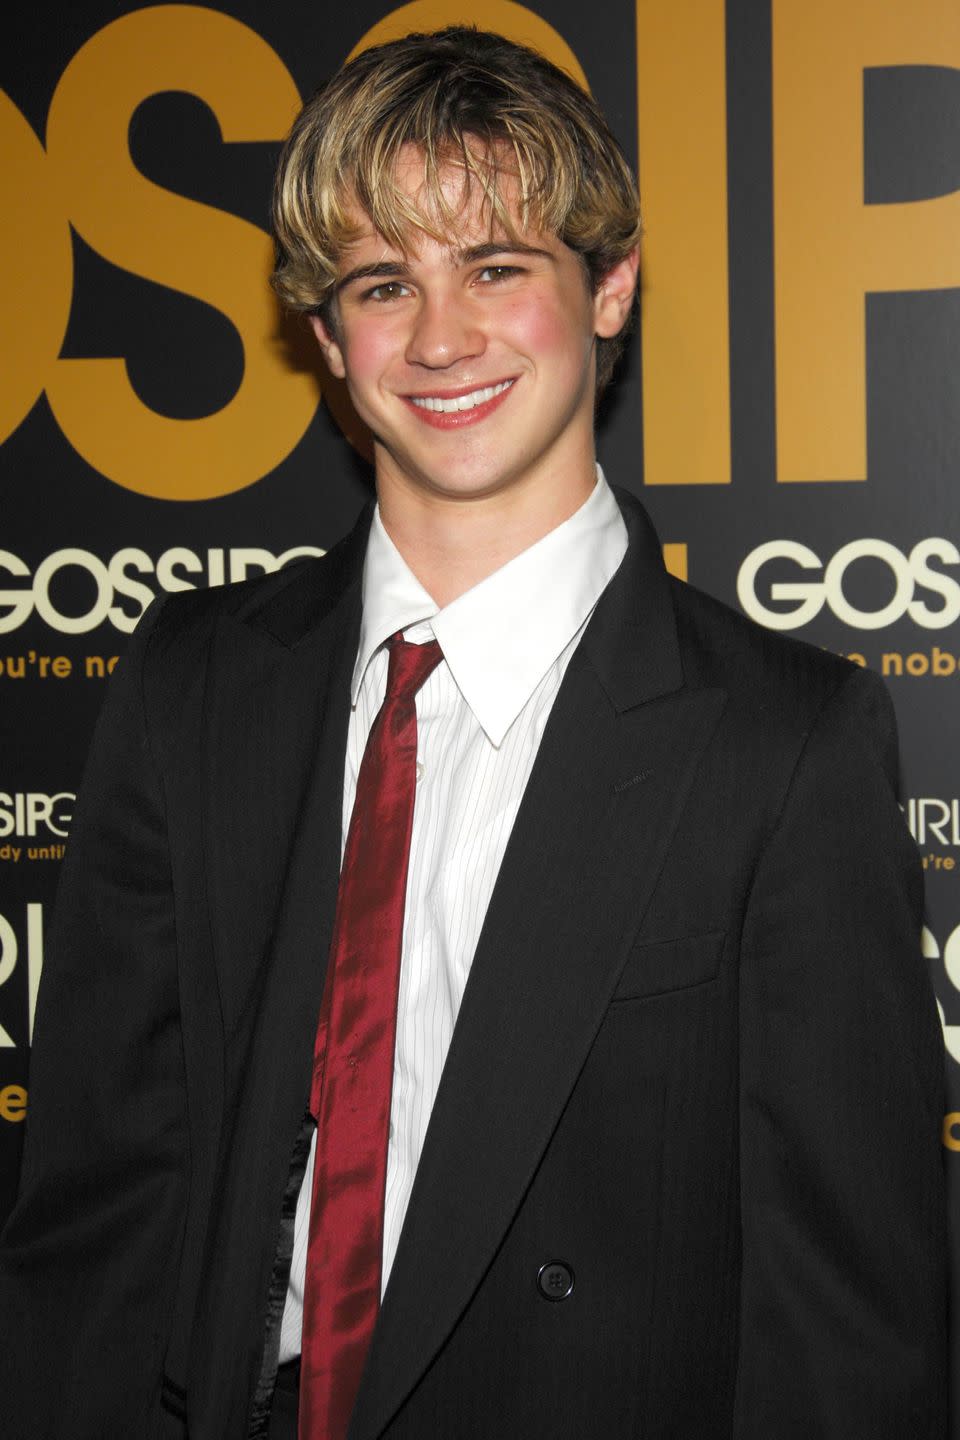 Then: Connor Paolo